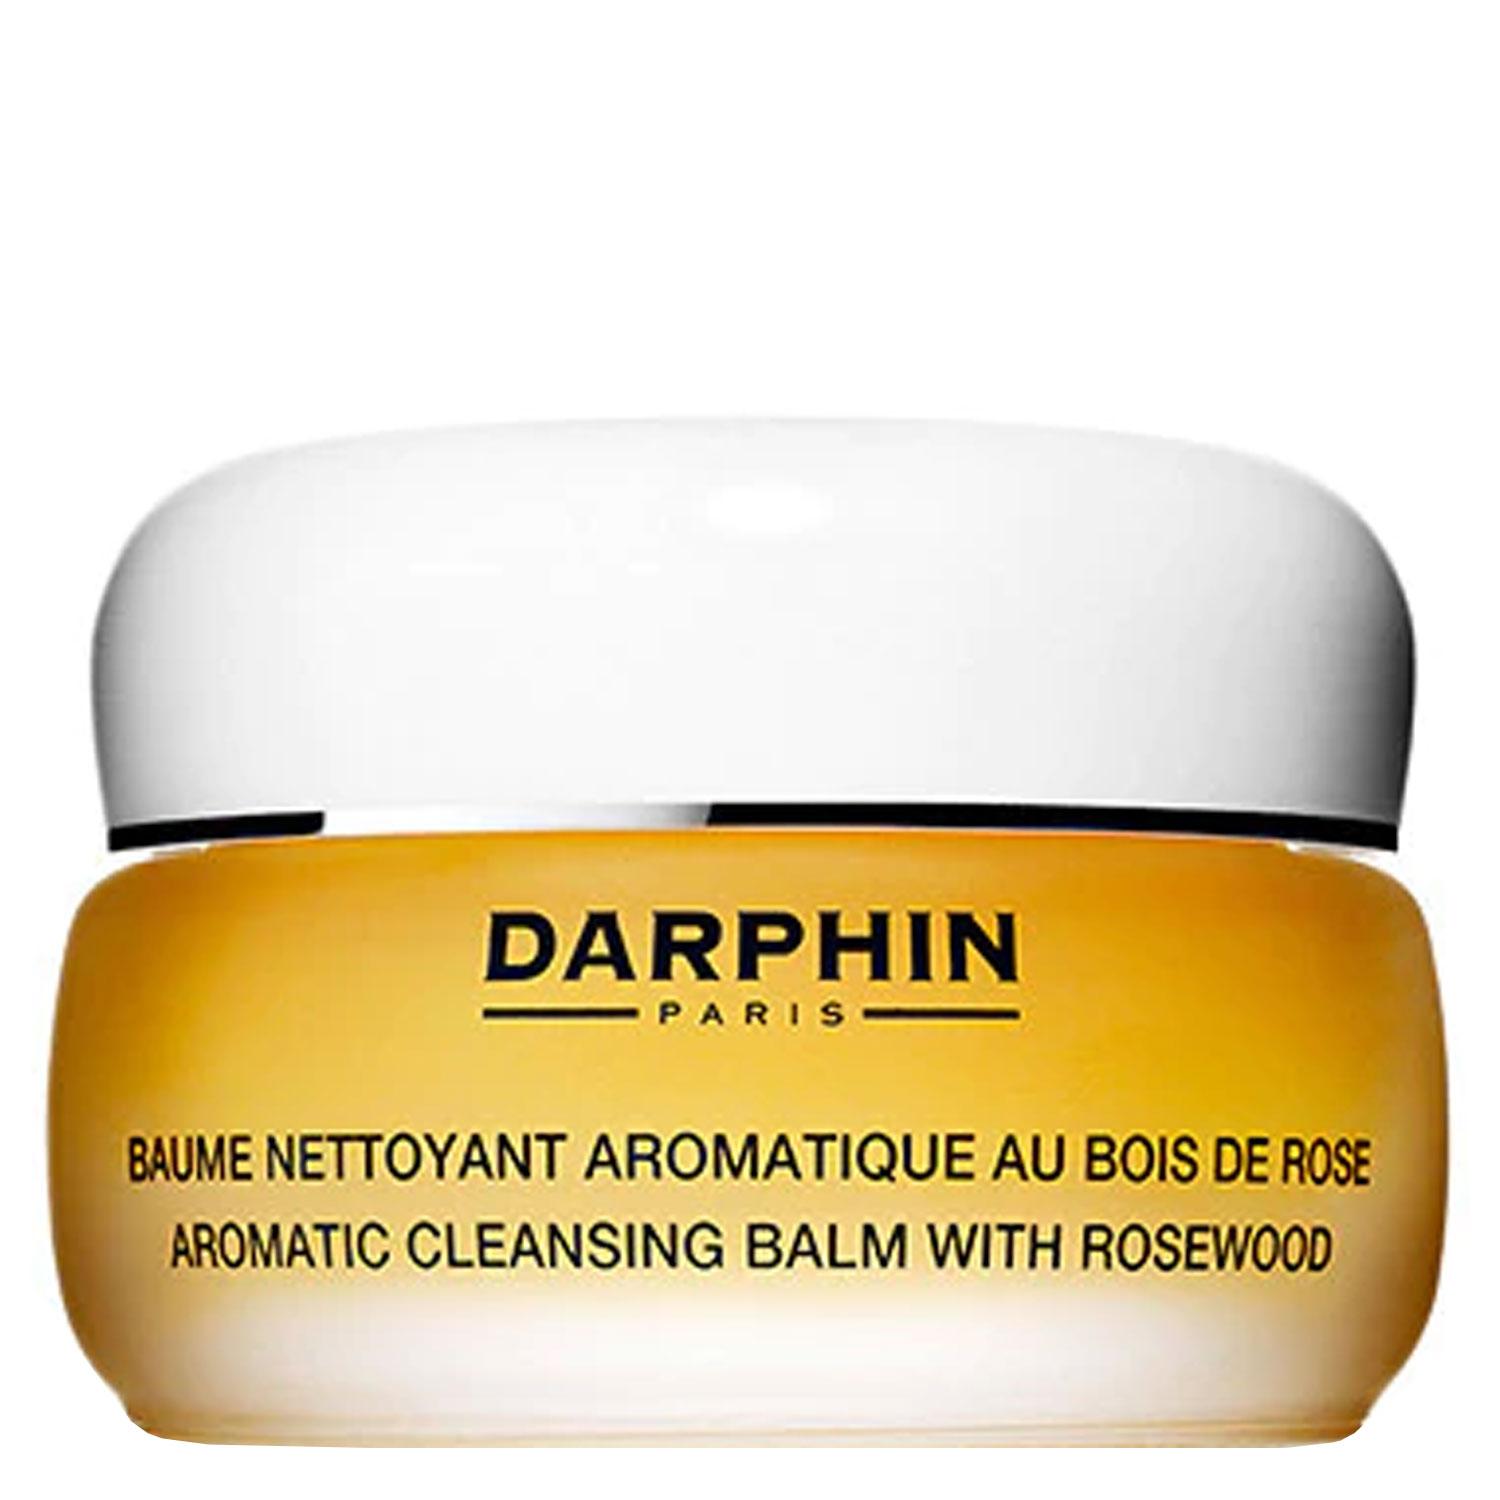 DARPHIN CARE - Aromatic Cleansing Balm with Rosewood